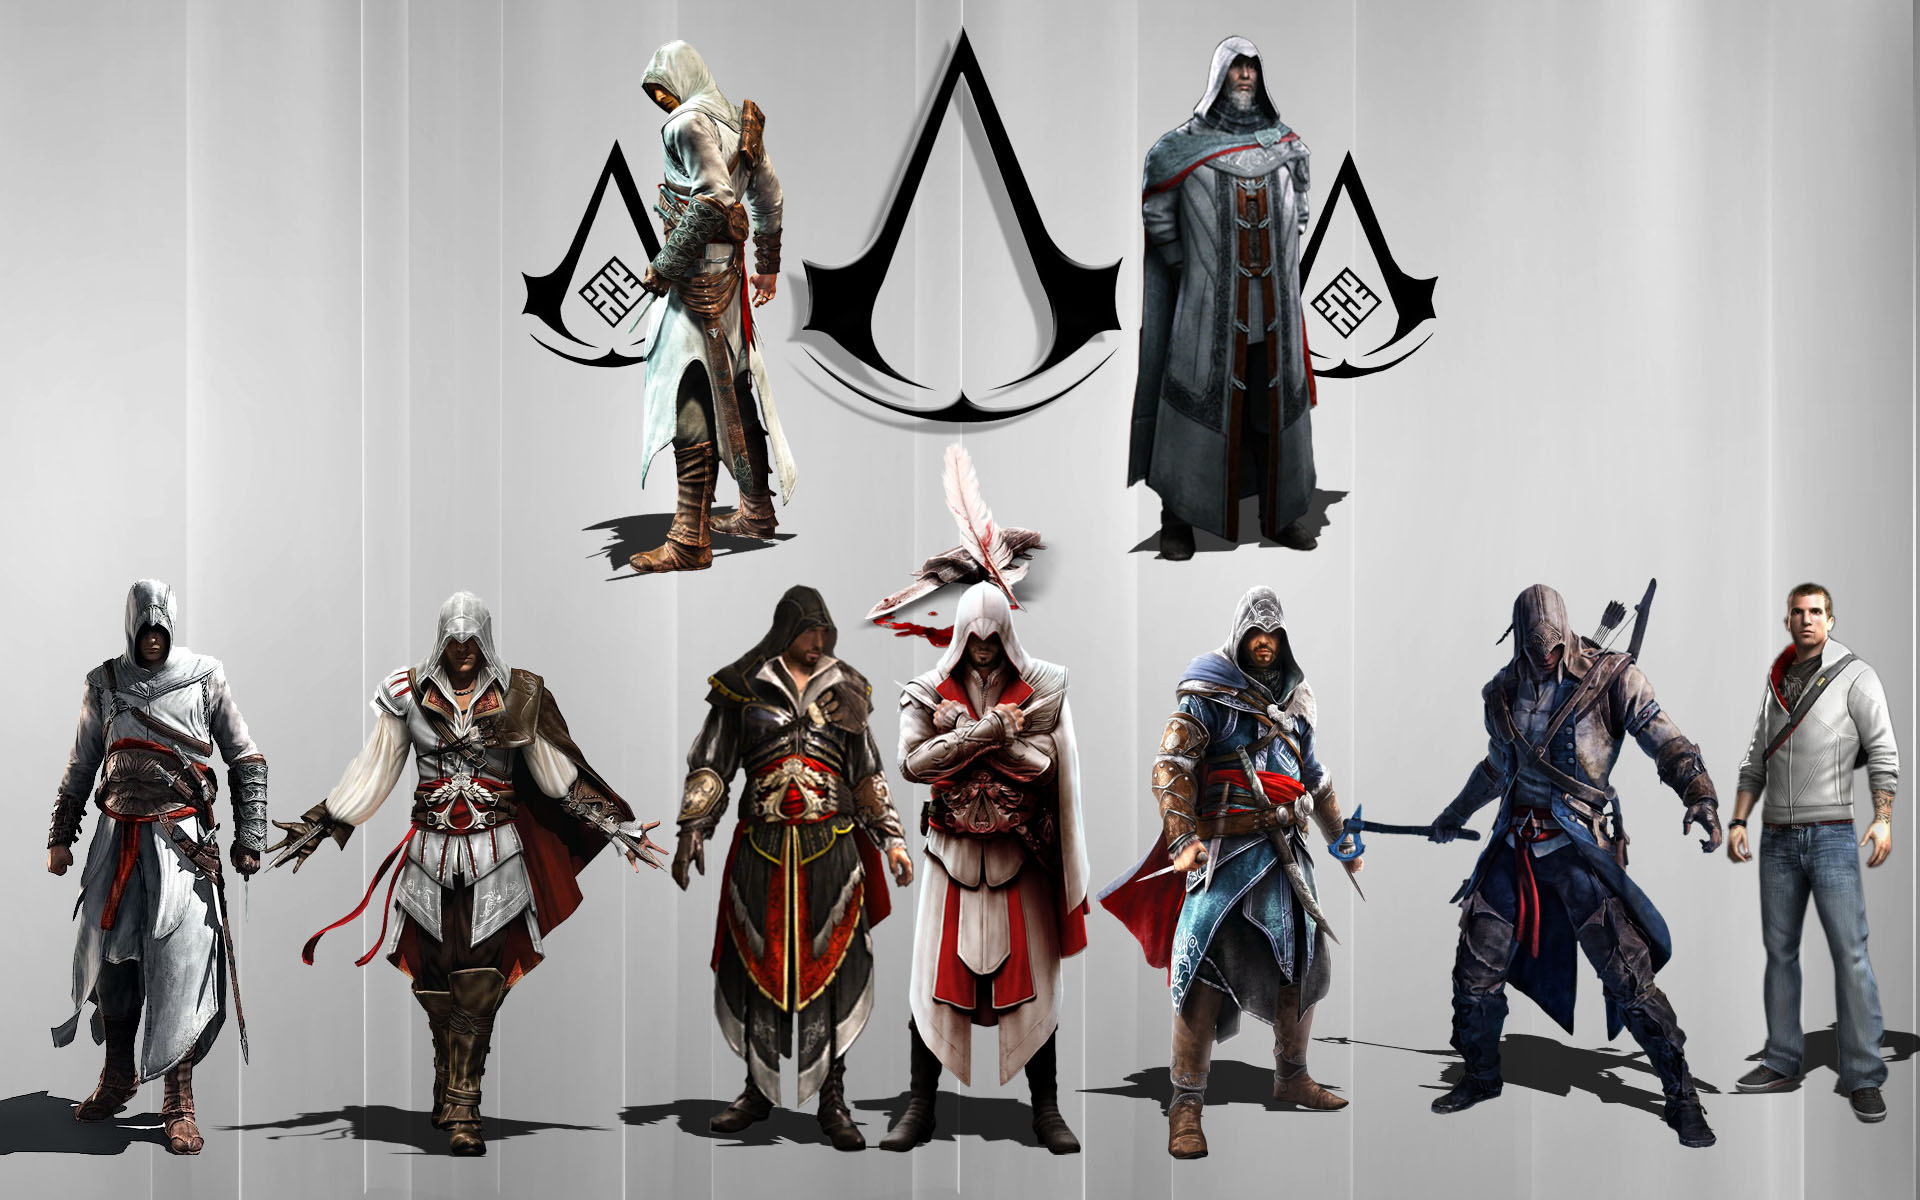 video game, assassin's creed, altair (assassin's creed), connor (assassin's creed), desmond miles, ezio (assassin's creed)